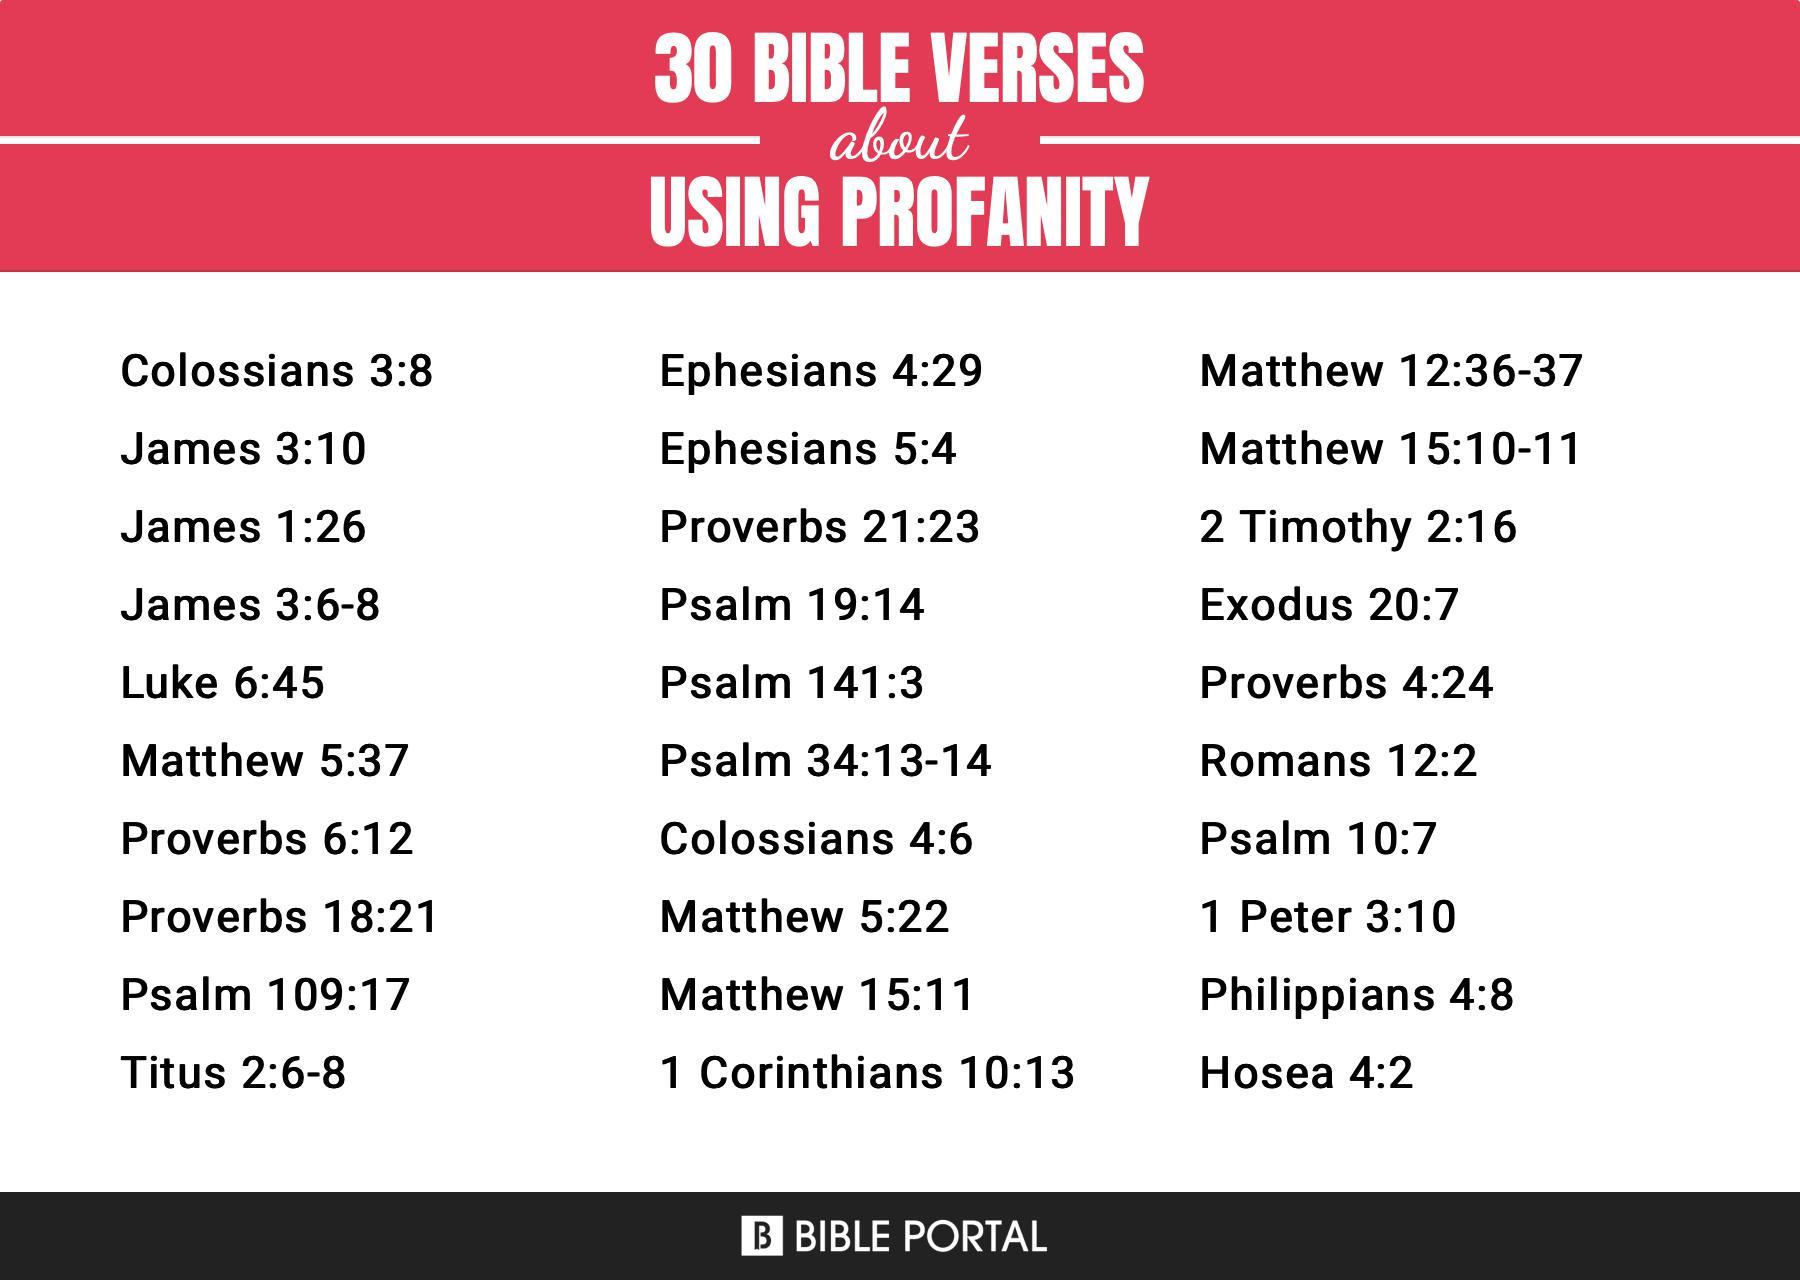 What Does the Bible Say about Using Profanity?